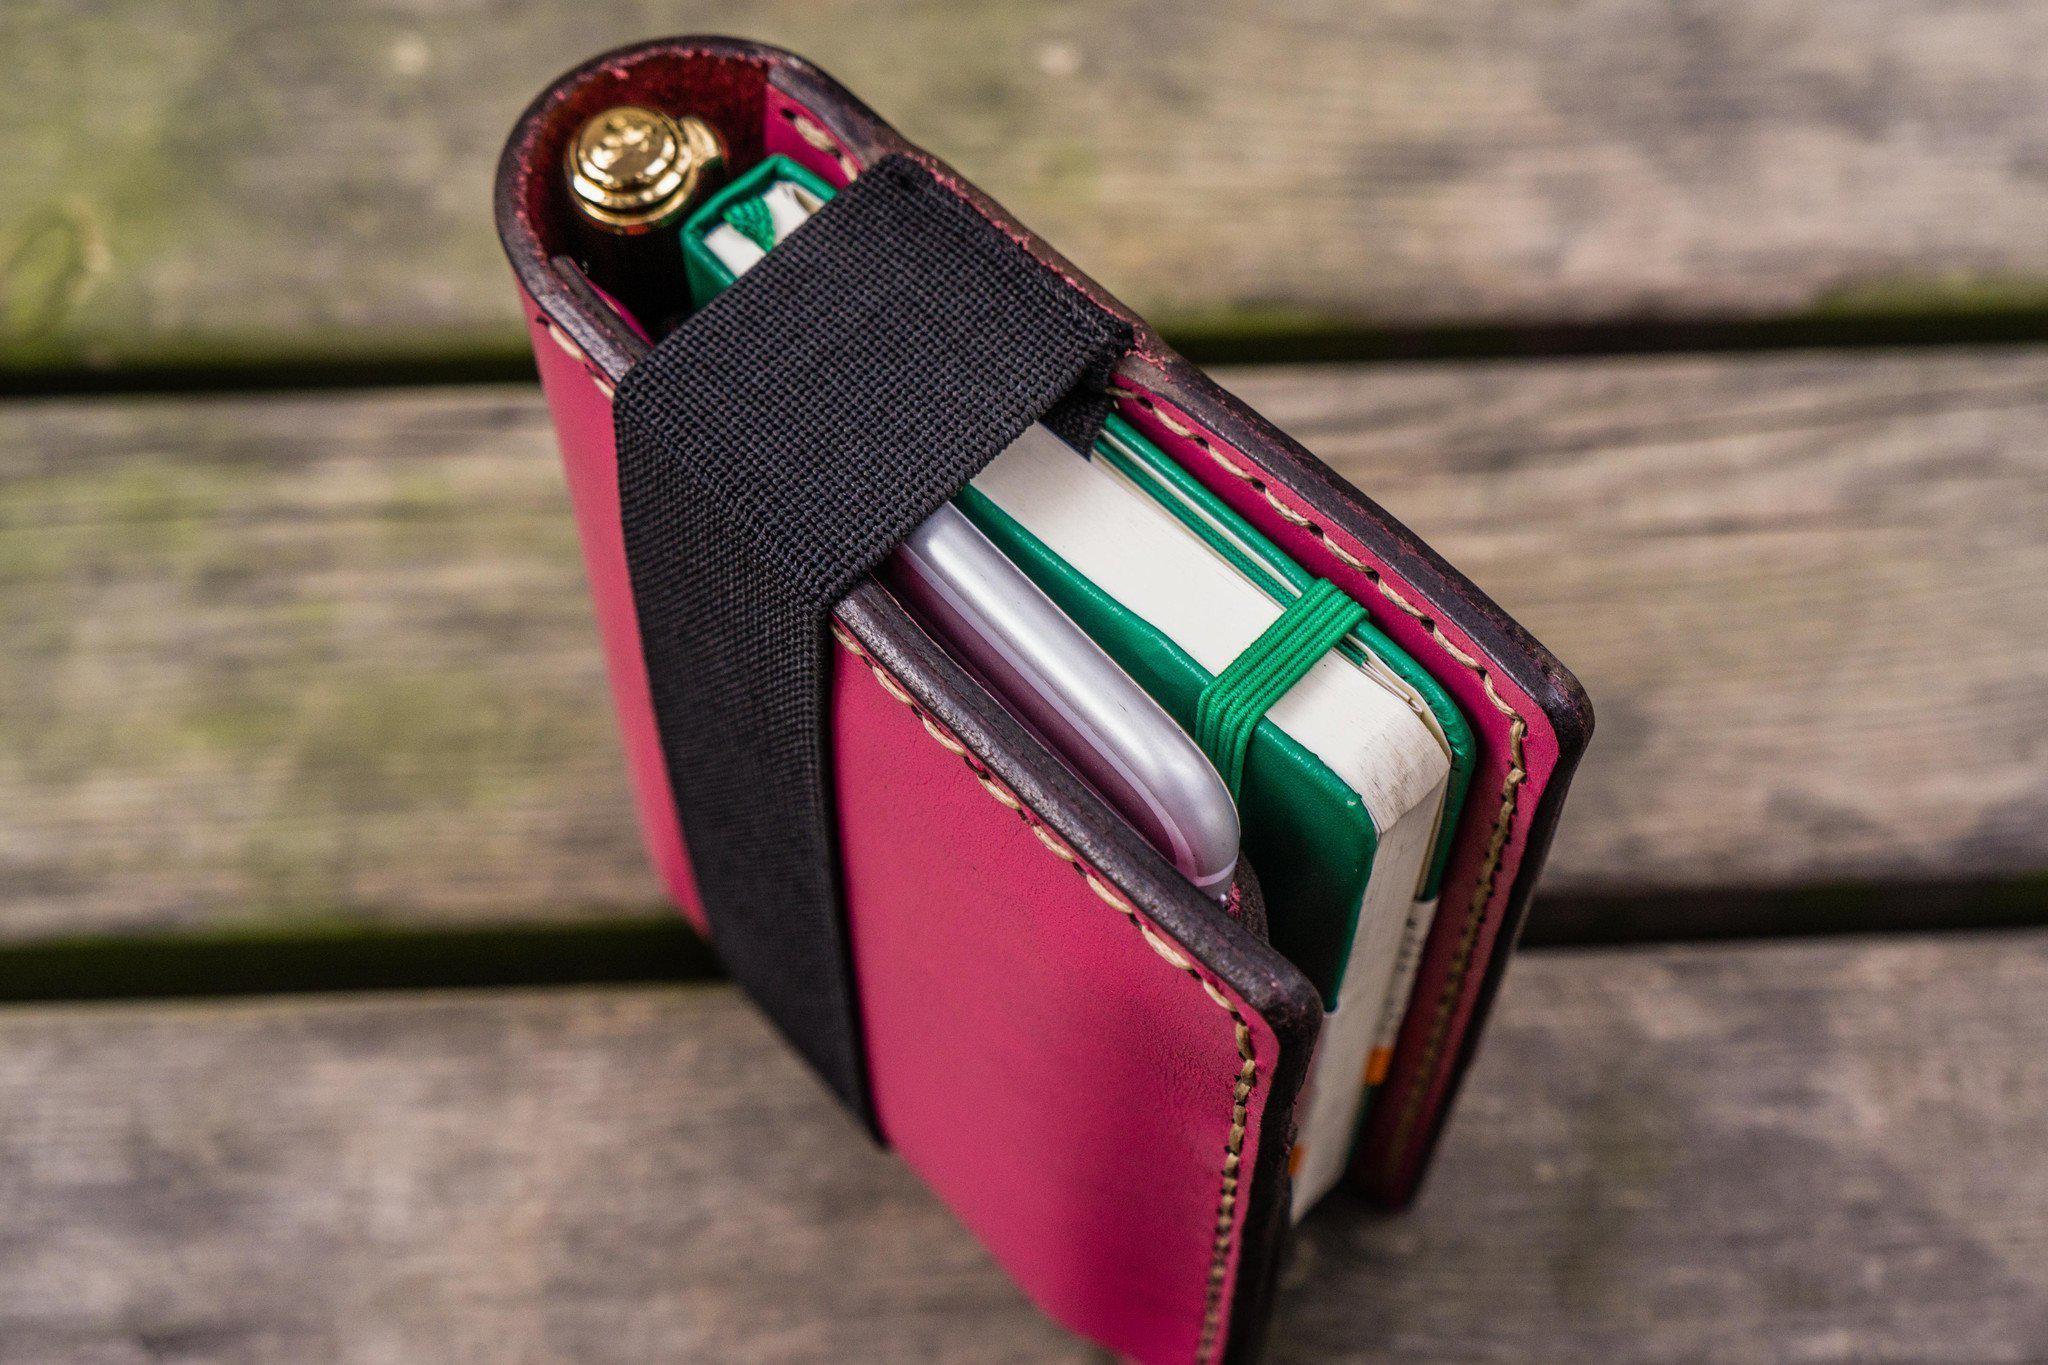 Journal Girdle, a pencil case that attaches to your notebook cover, Bright